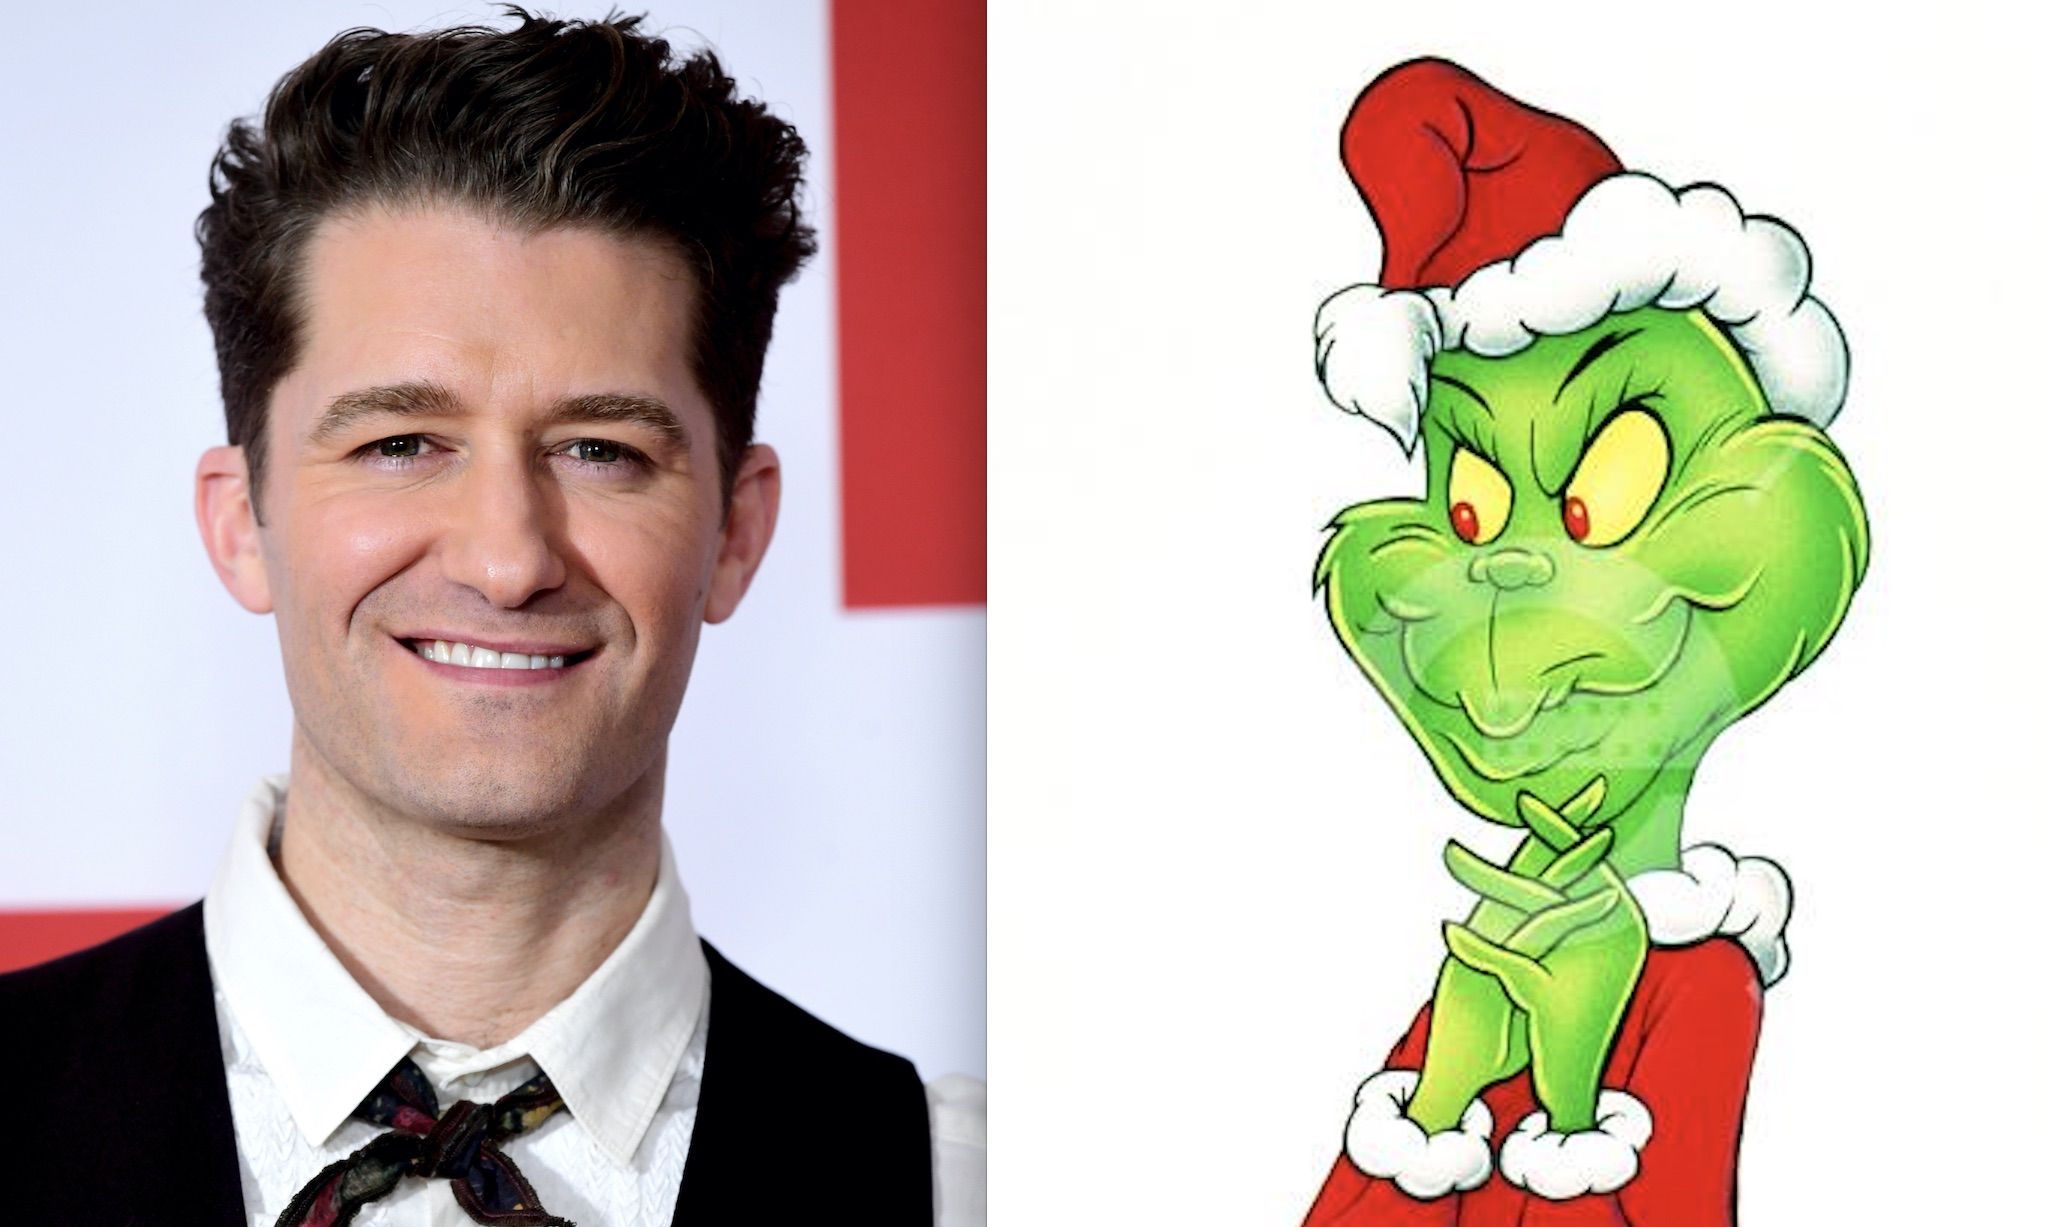   NBC puts Matthew Morrison in Dr.  Seuss 'The Grinch Musical!'  As the newest theatrical holiday event

